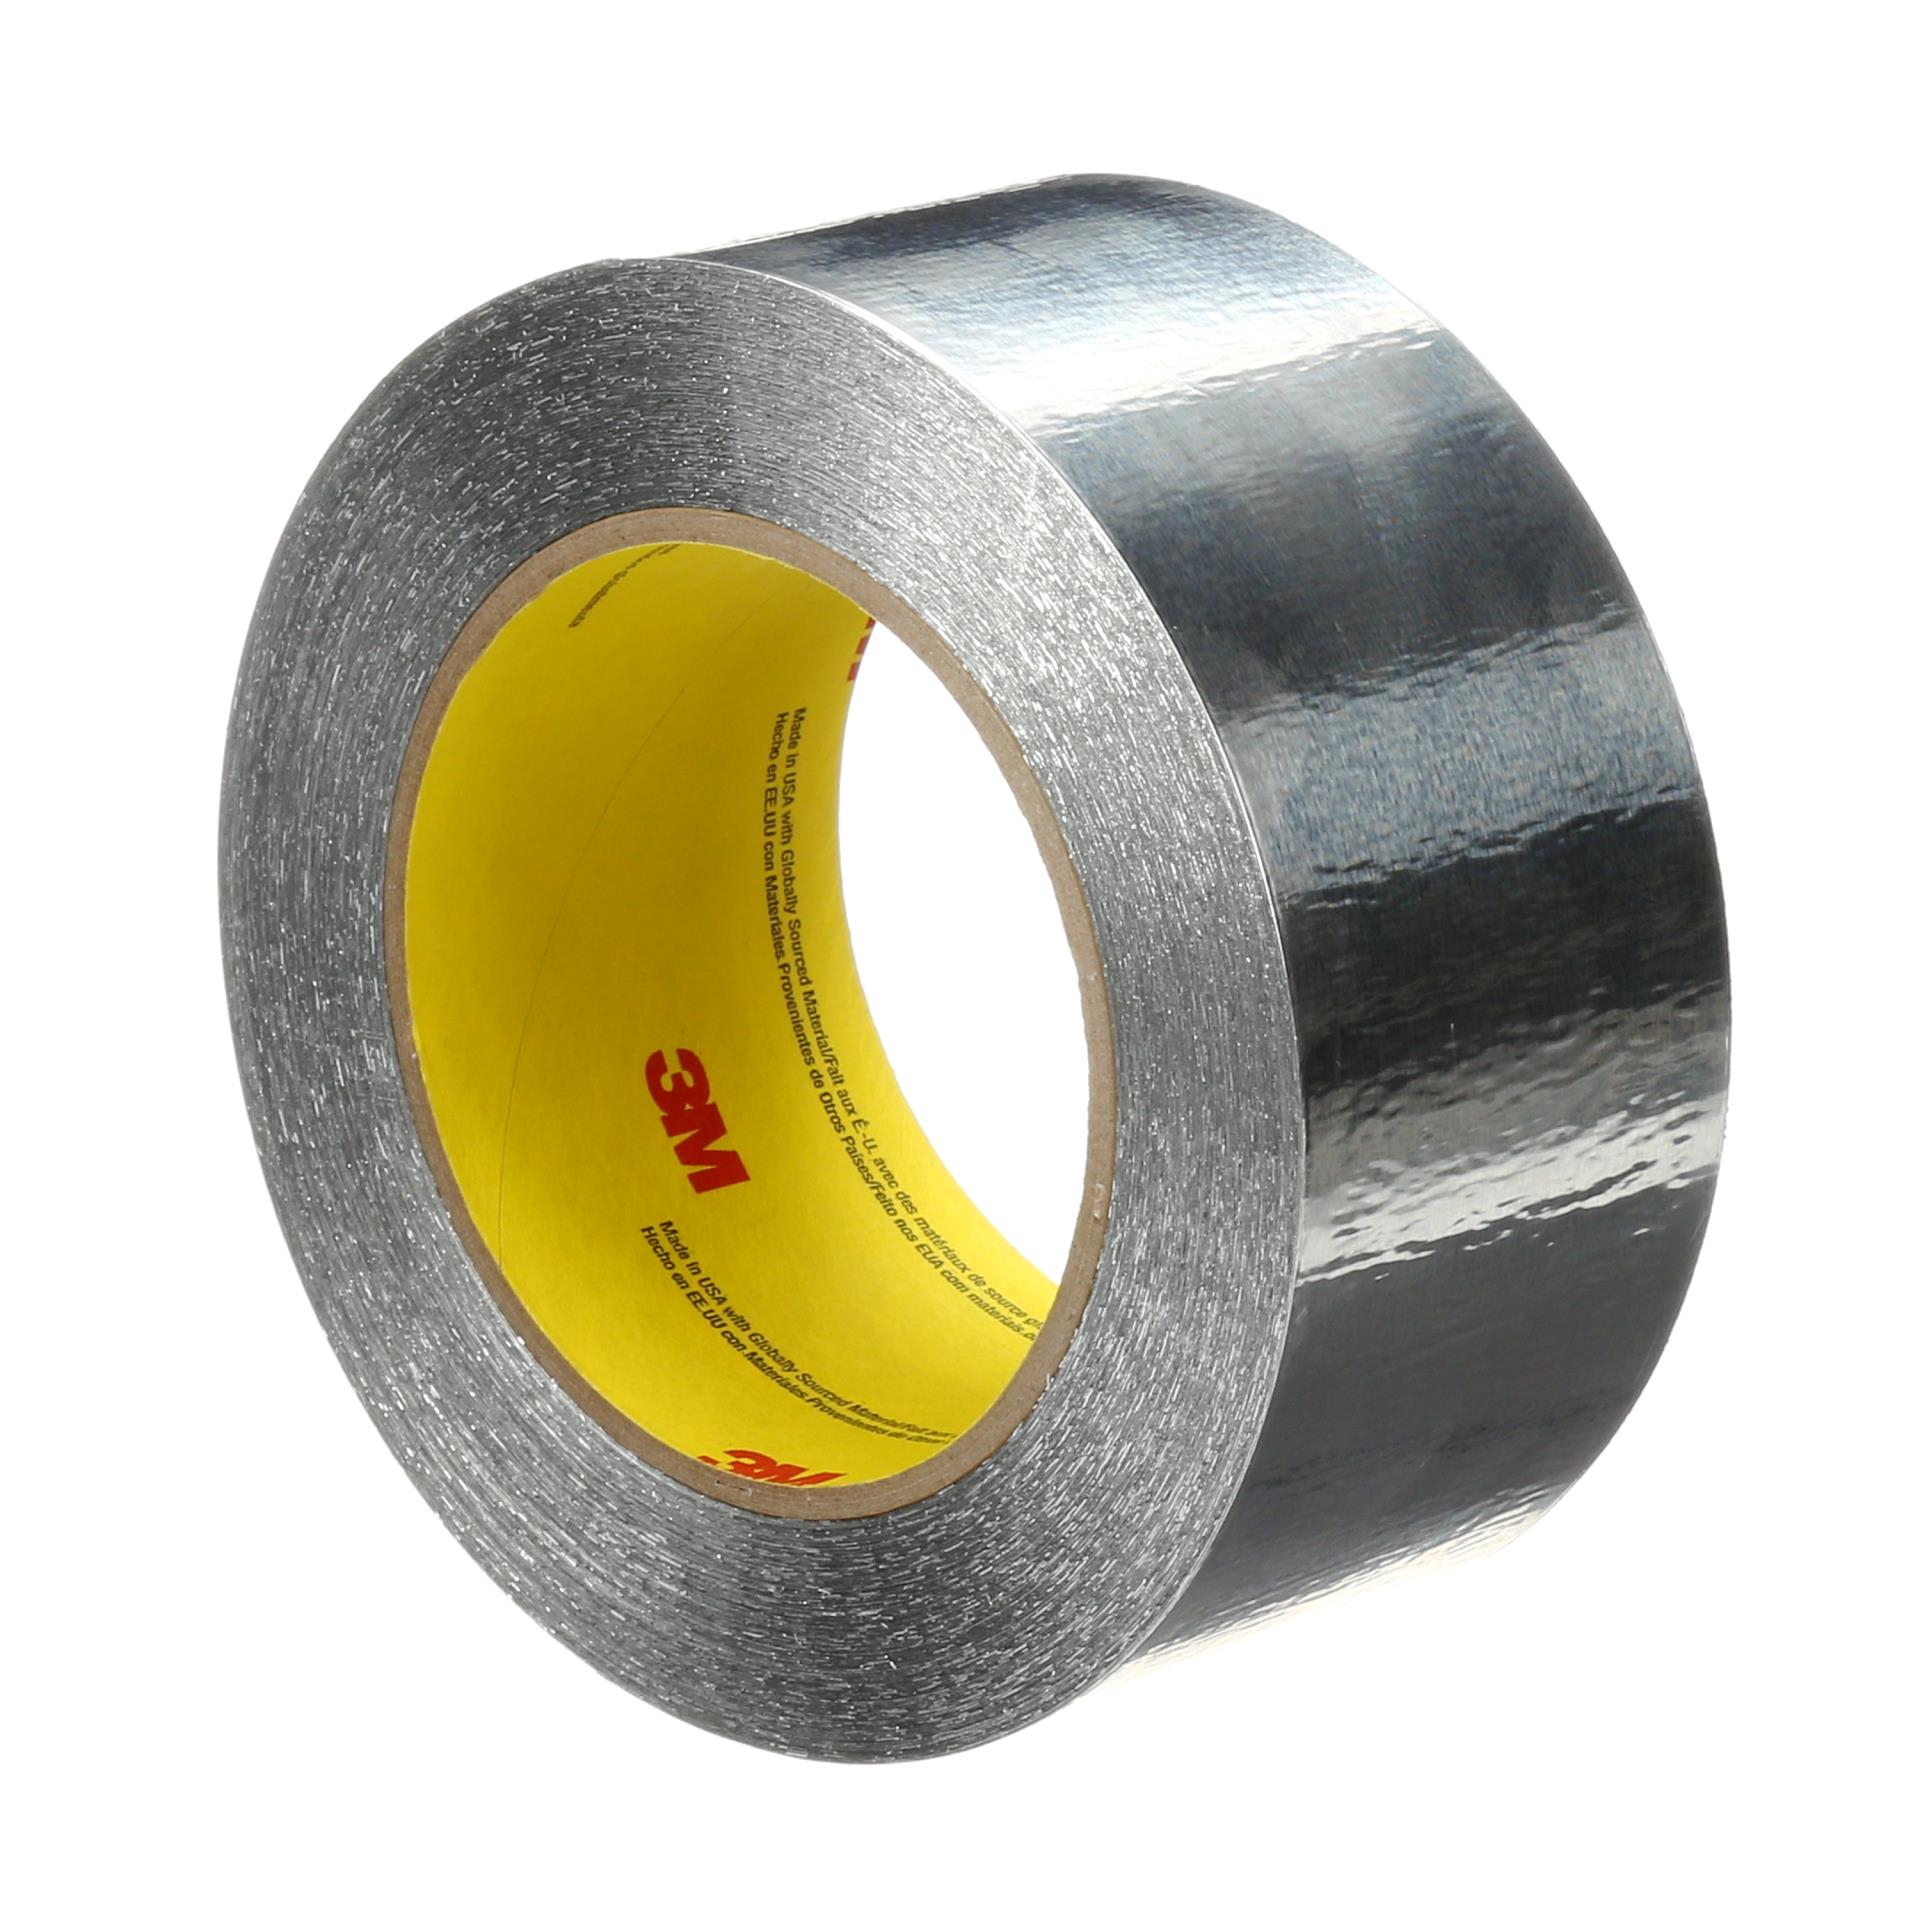 5 ROLLS Electrical PVC Insulation Tape Fade Resistant 0.13mm × 18mm × 3M 